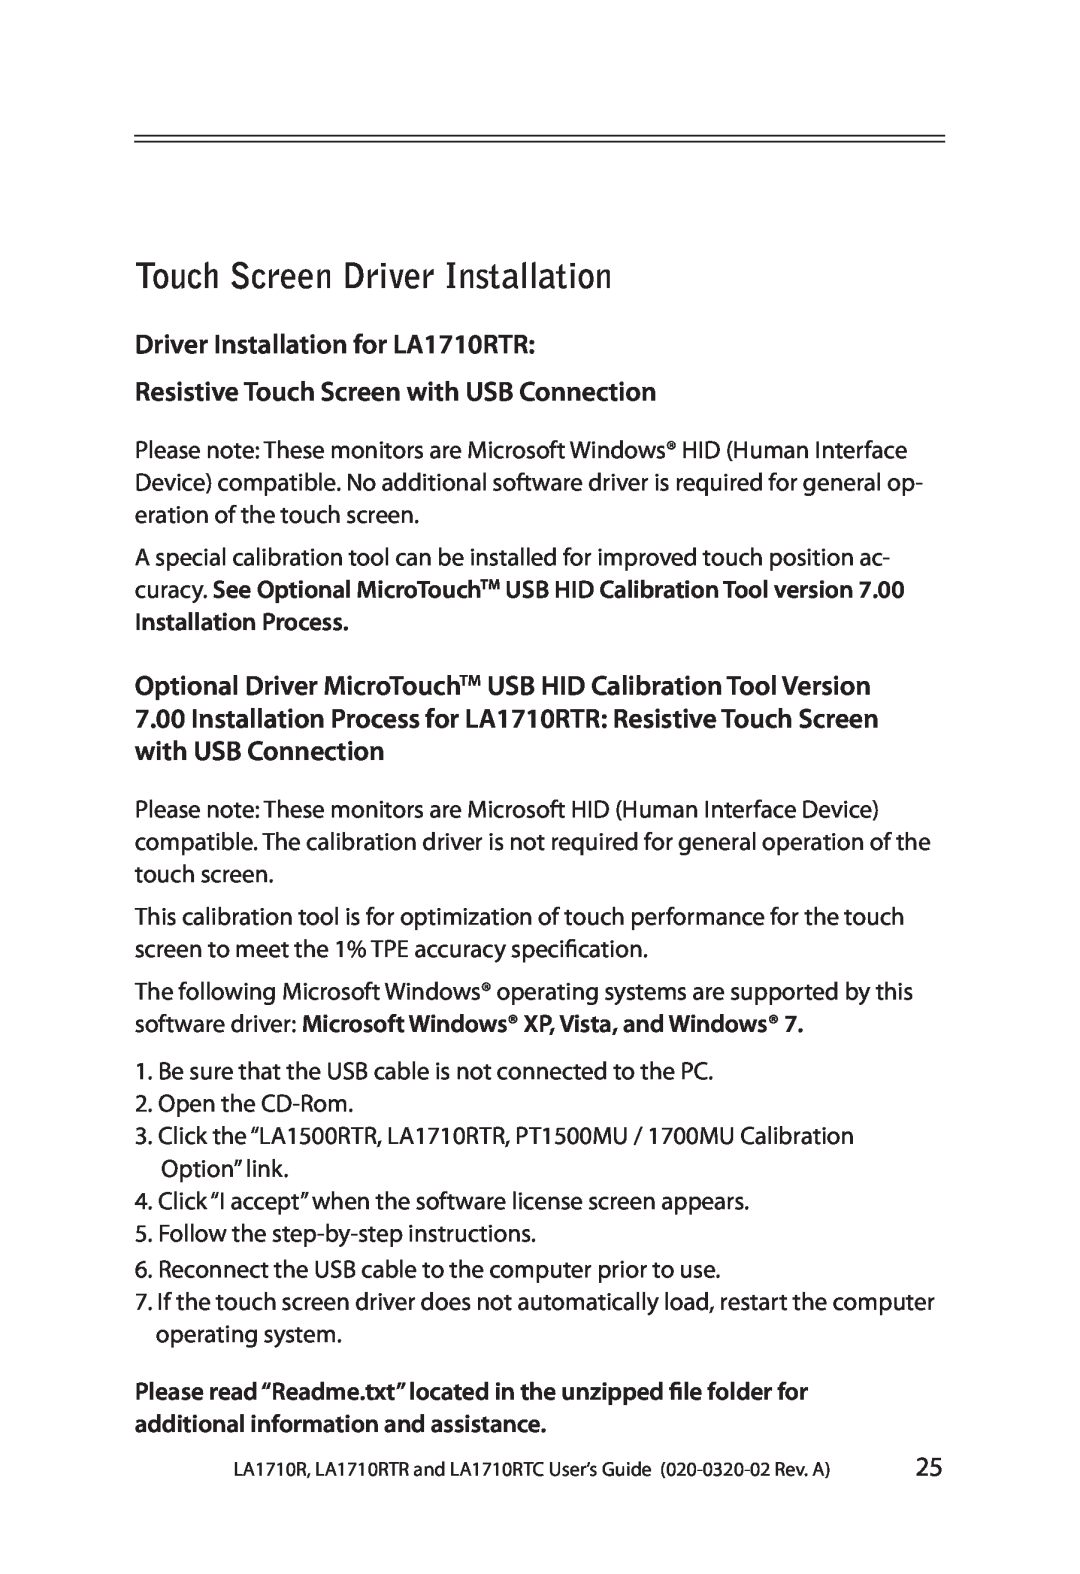 Planar Touch Screen Driver Installation, Driver Installation for LA1710RTR, Resistive Touch Screen with USB Connection 